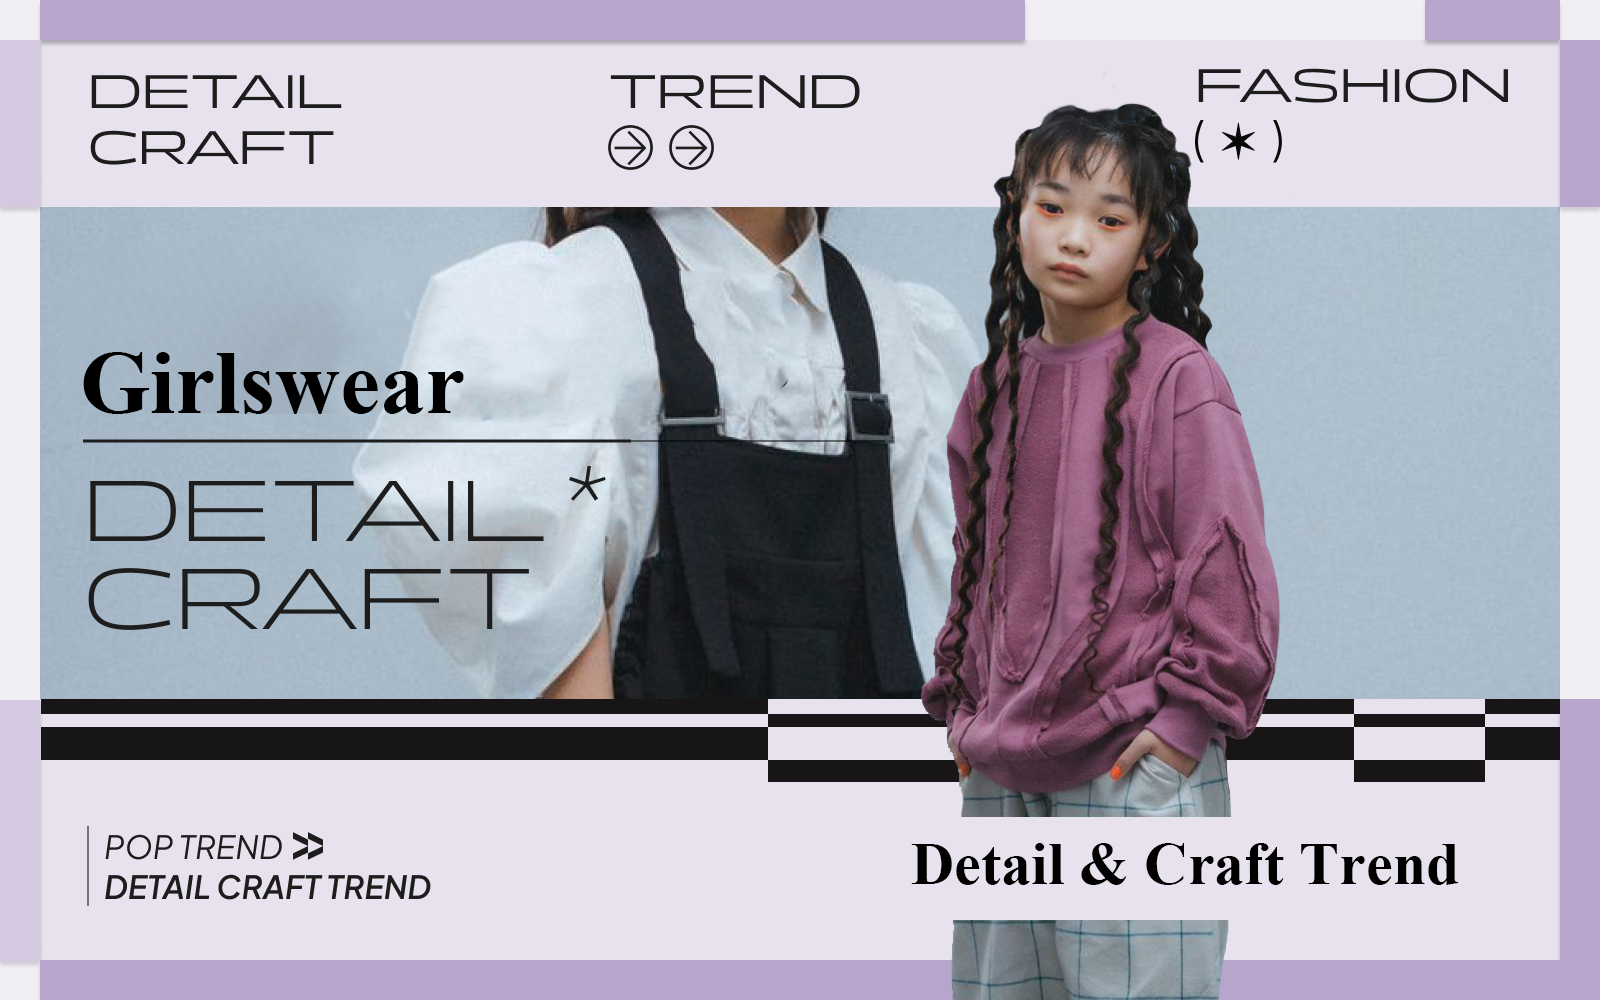 Cool Fashion -- The Detail & Craft Trend for Girlswear